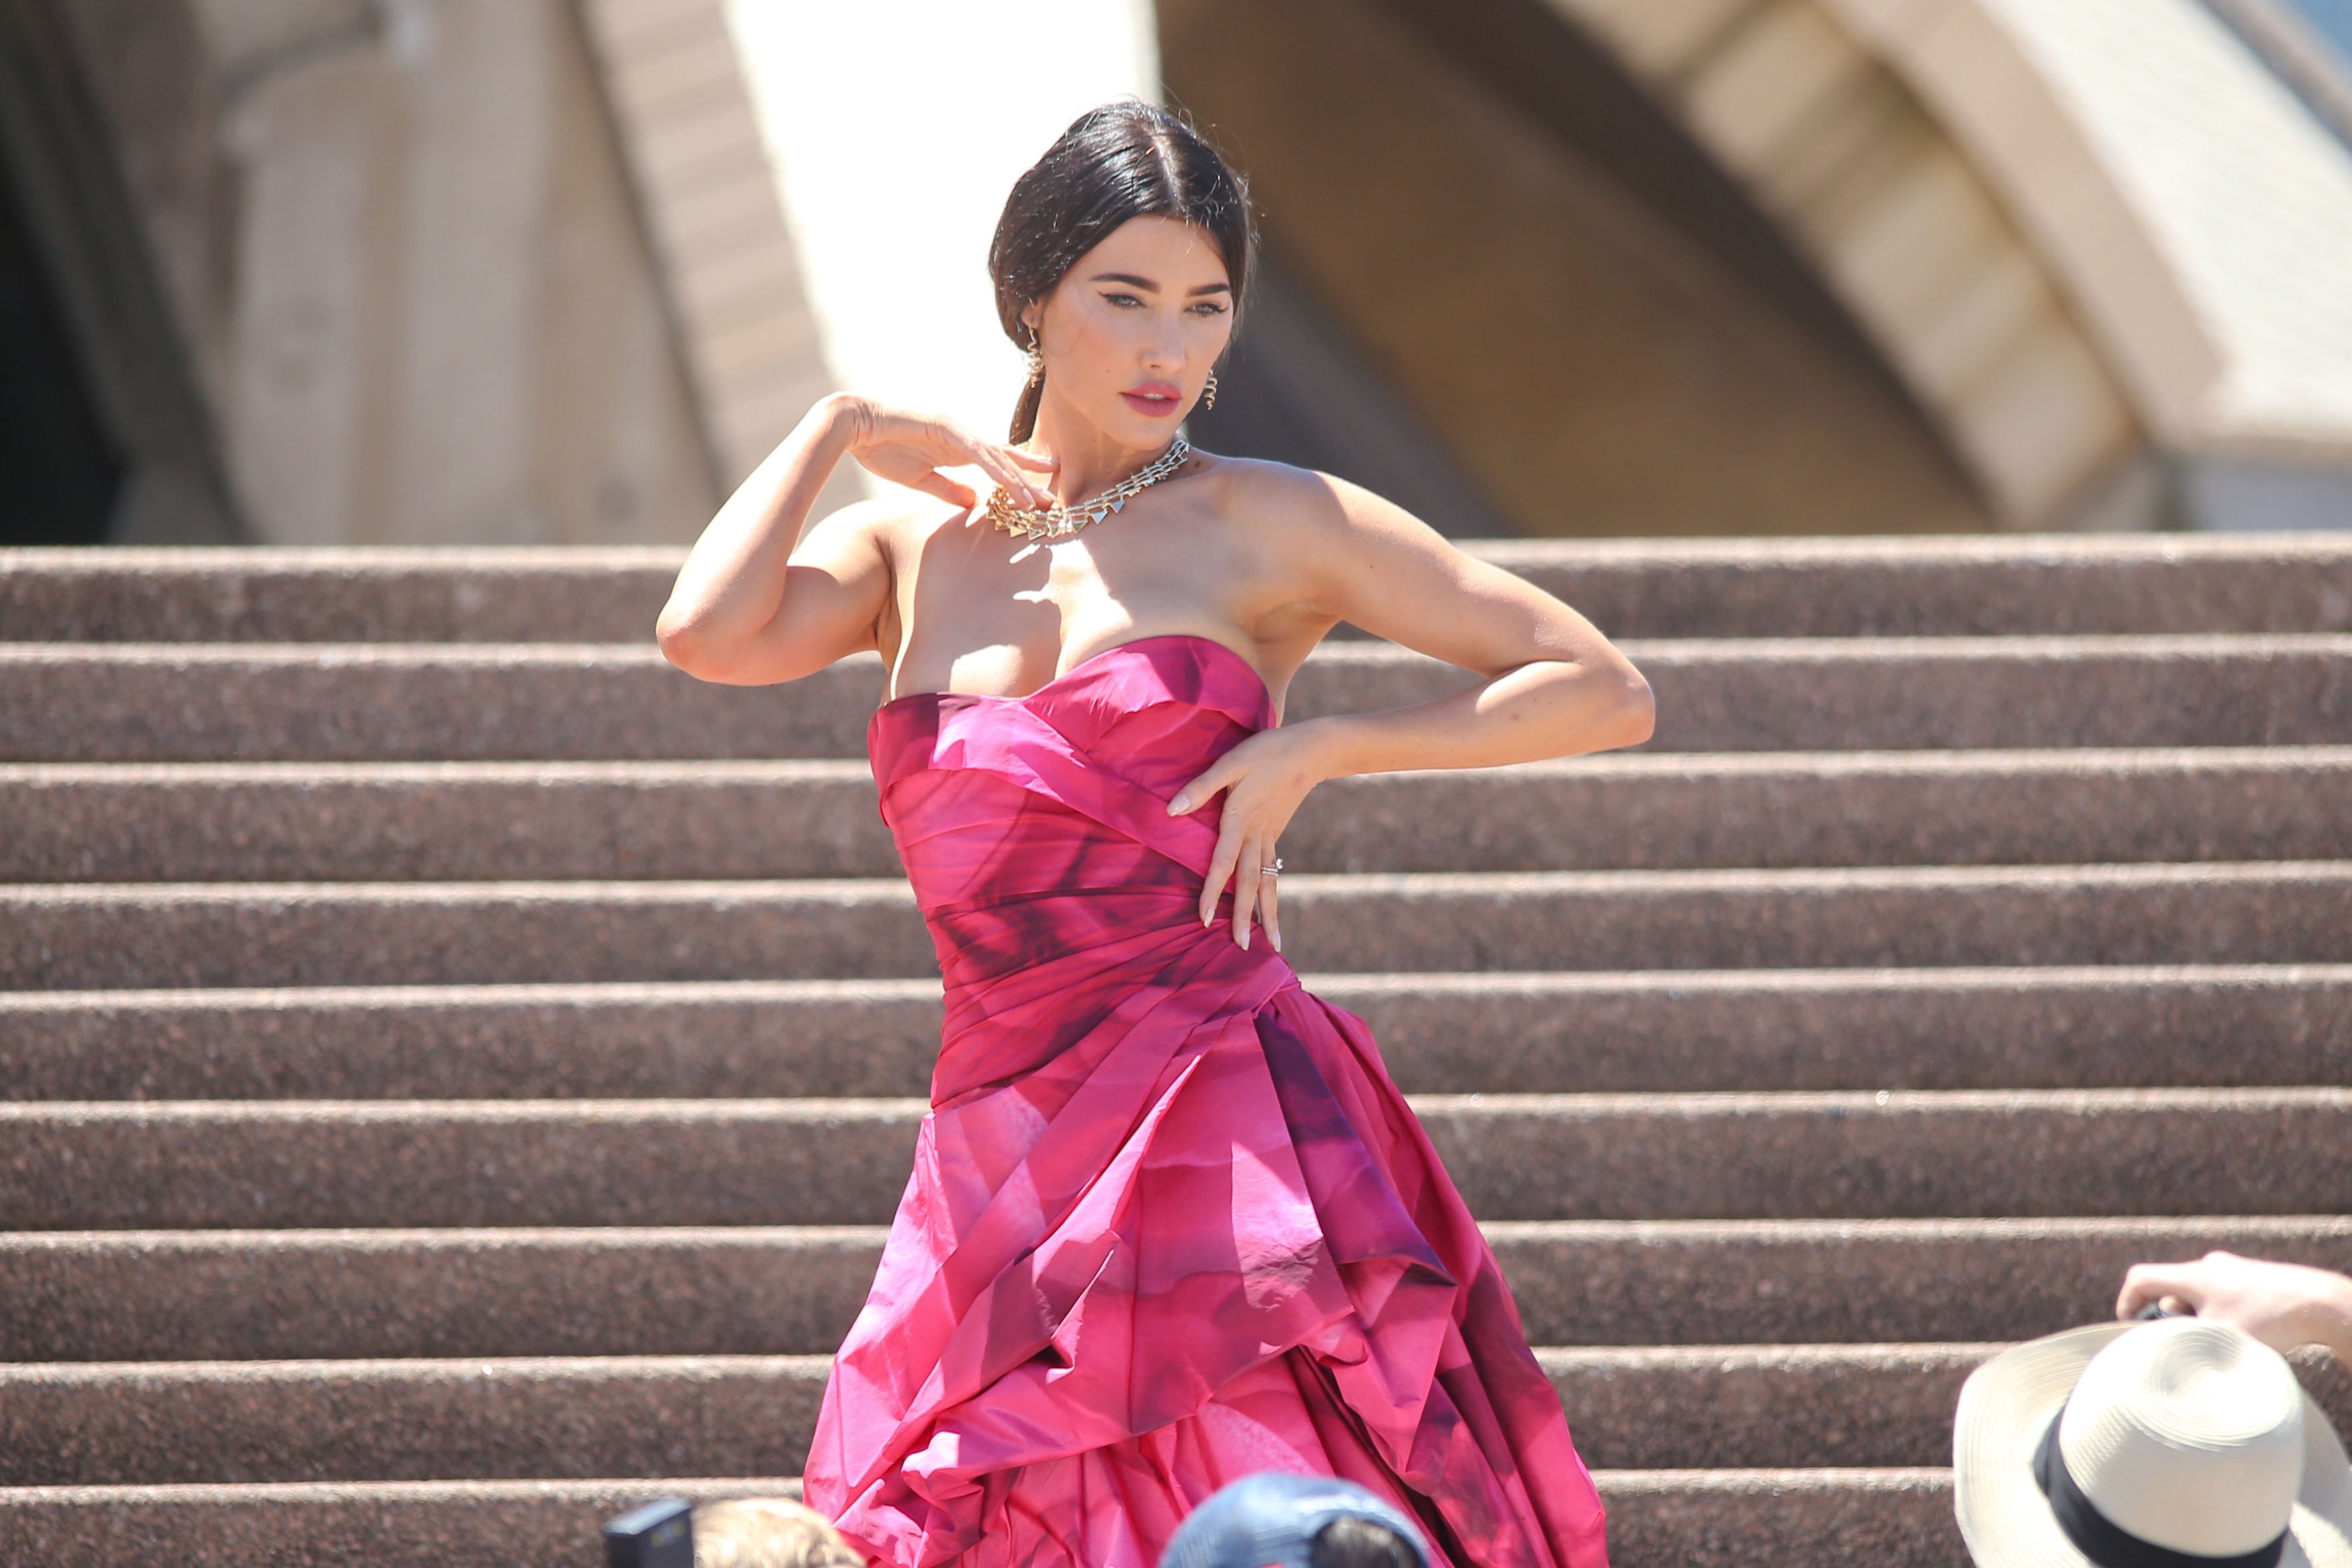 'The Bold and the Beautiful' actor Jacqueline MacInnes Wood wearing a pink dress and posing in front of the Sydney Opera House.